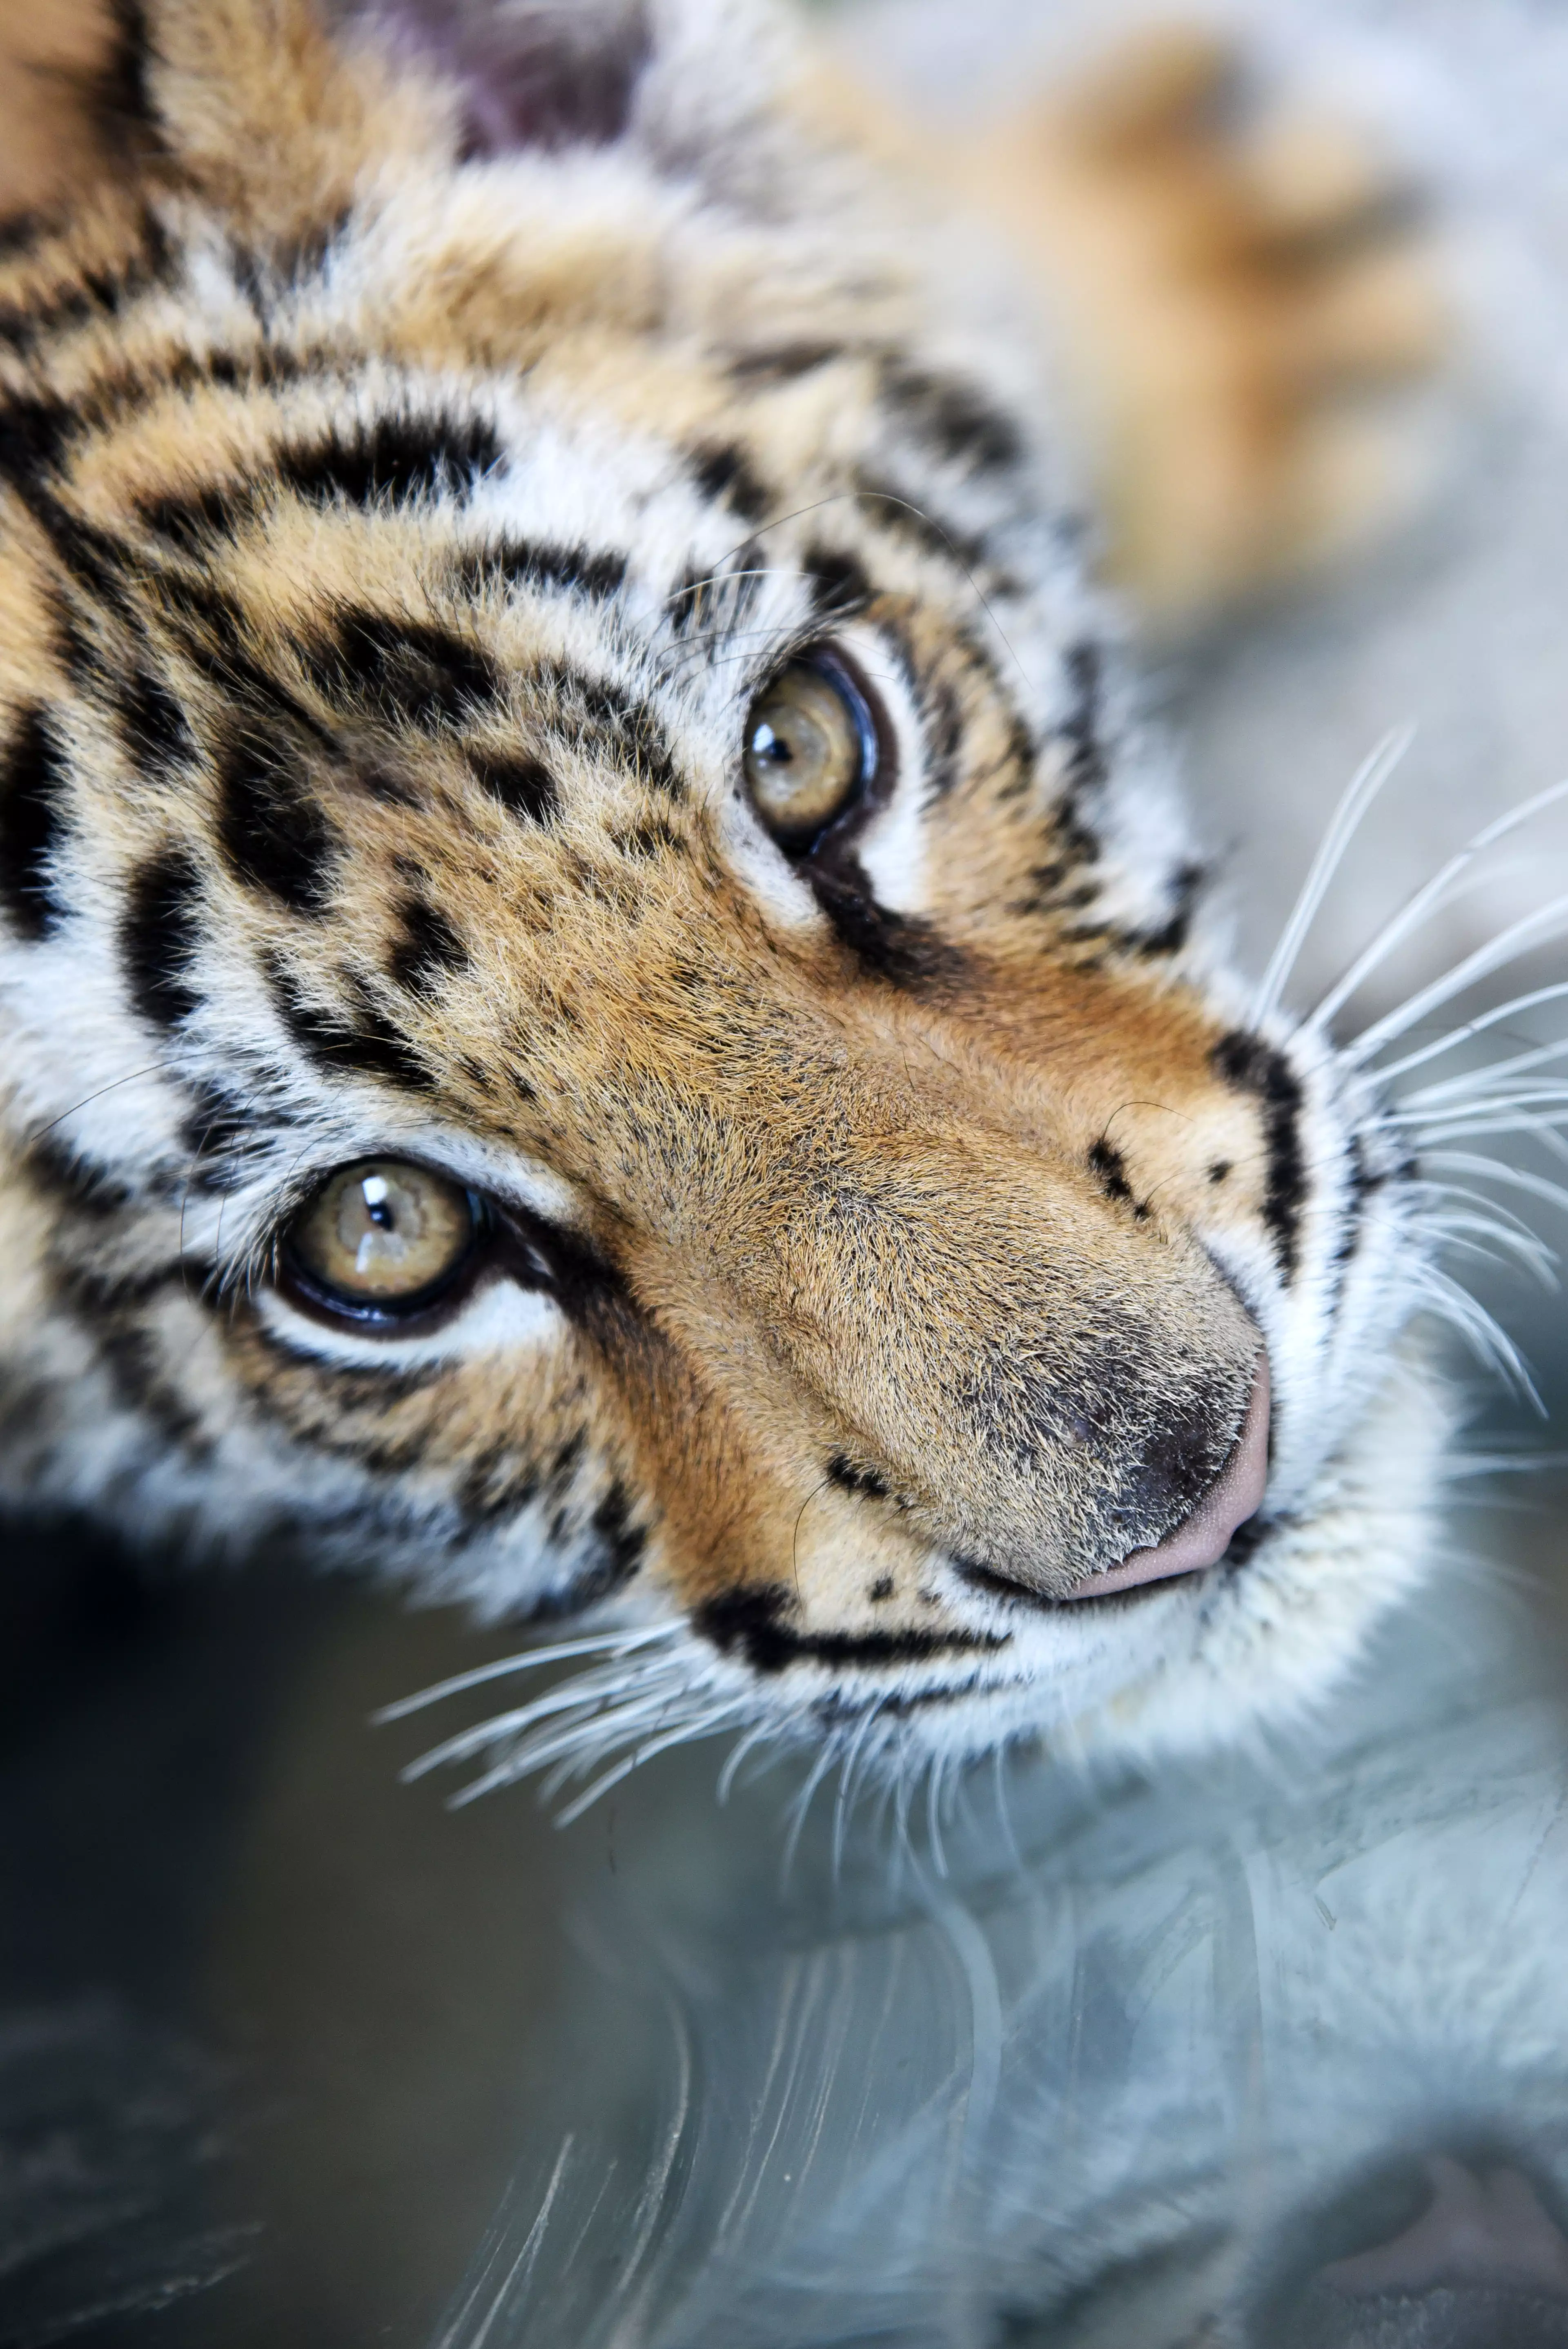 Tiger farms are driving a black market where the animals are bred for parts.